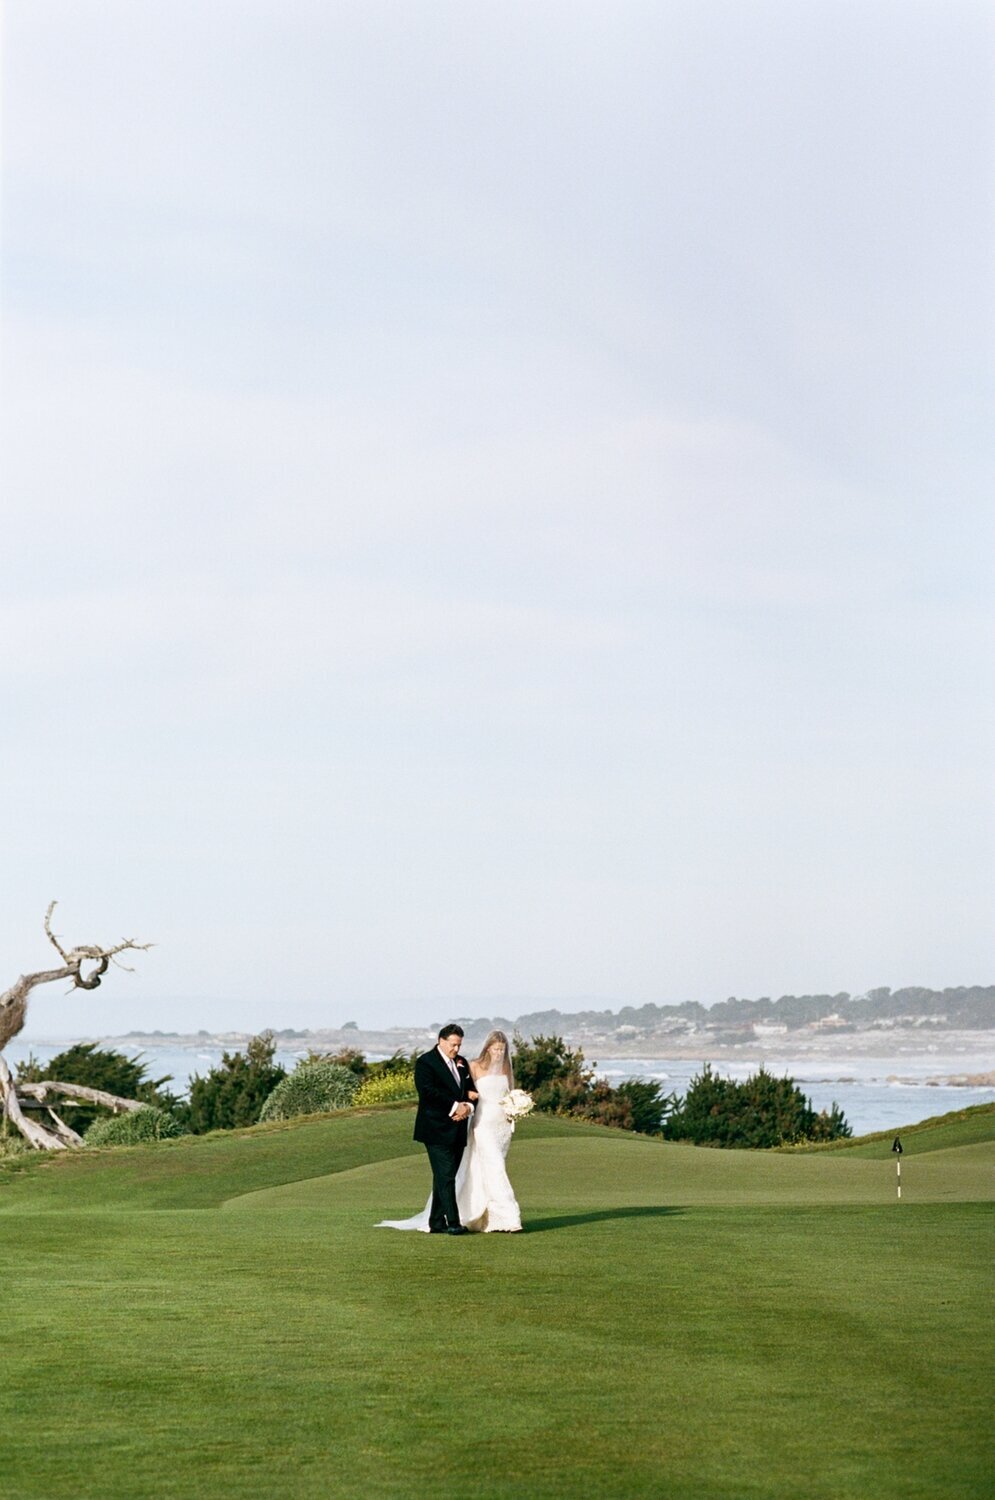 Monterey_Peninsula_Country_Club_autumn_red_white_floral_classic_golf_wedding_inspiration028